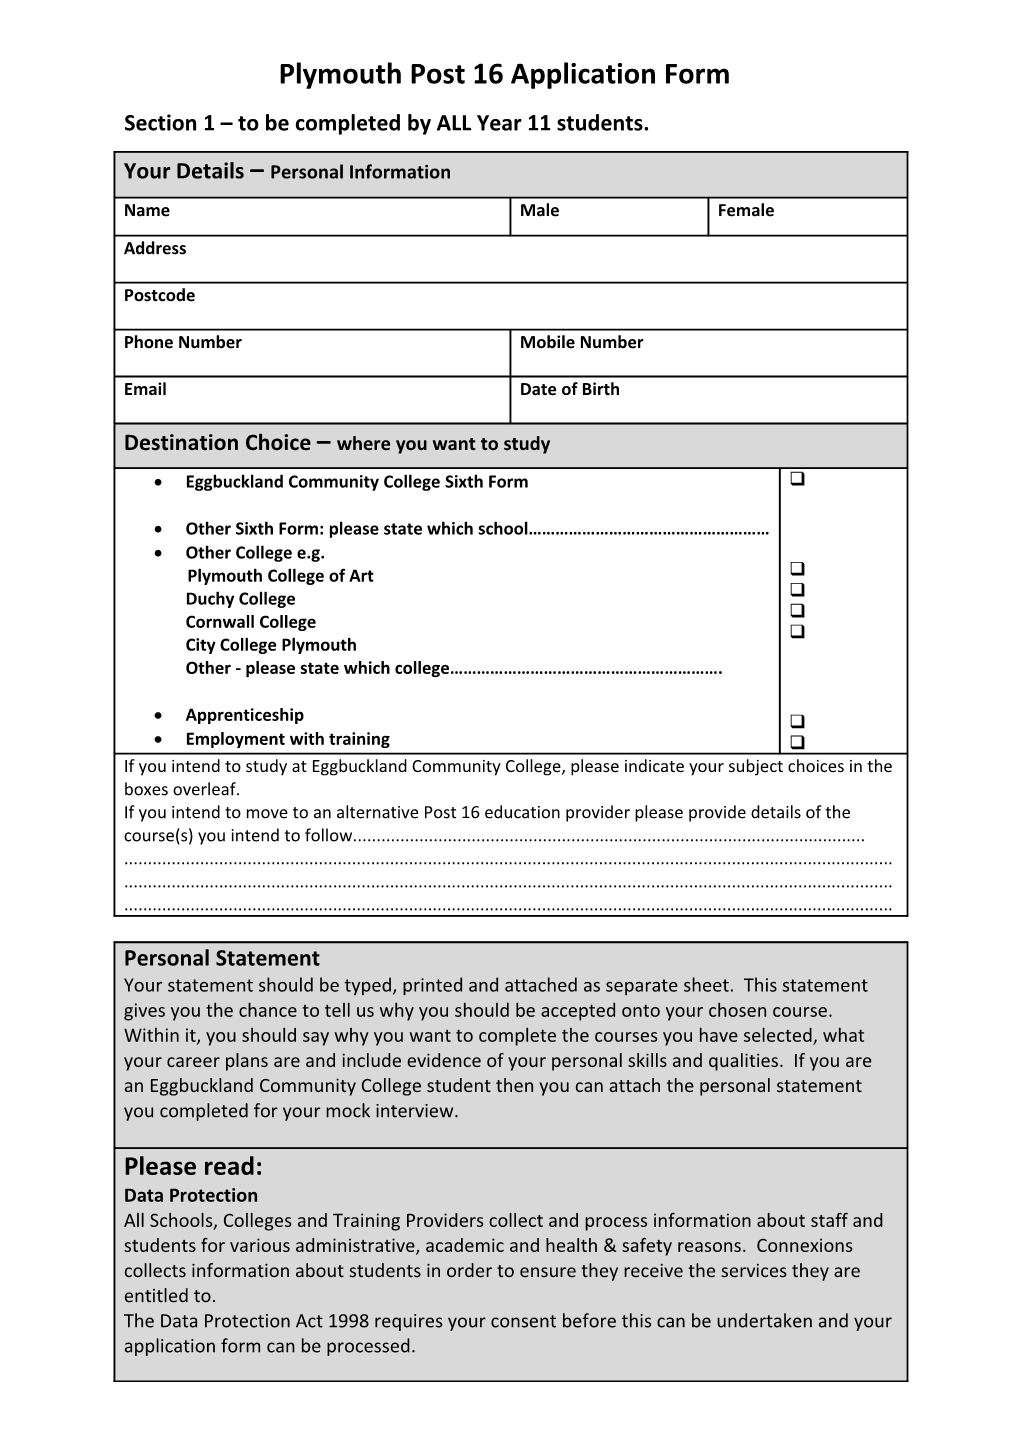 Plymouth Post 16 Application Form